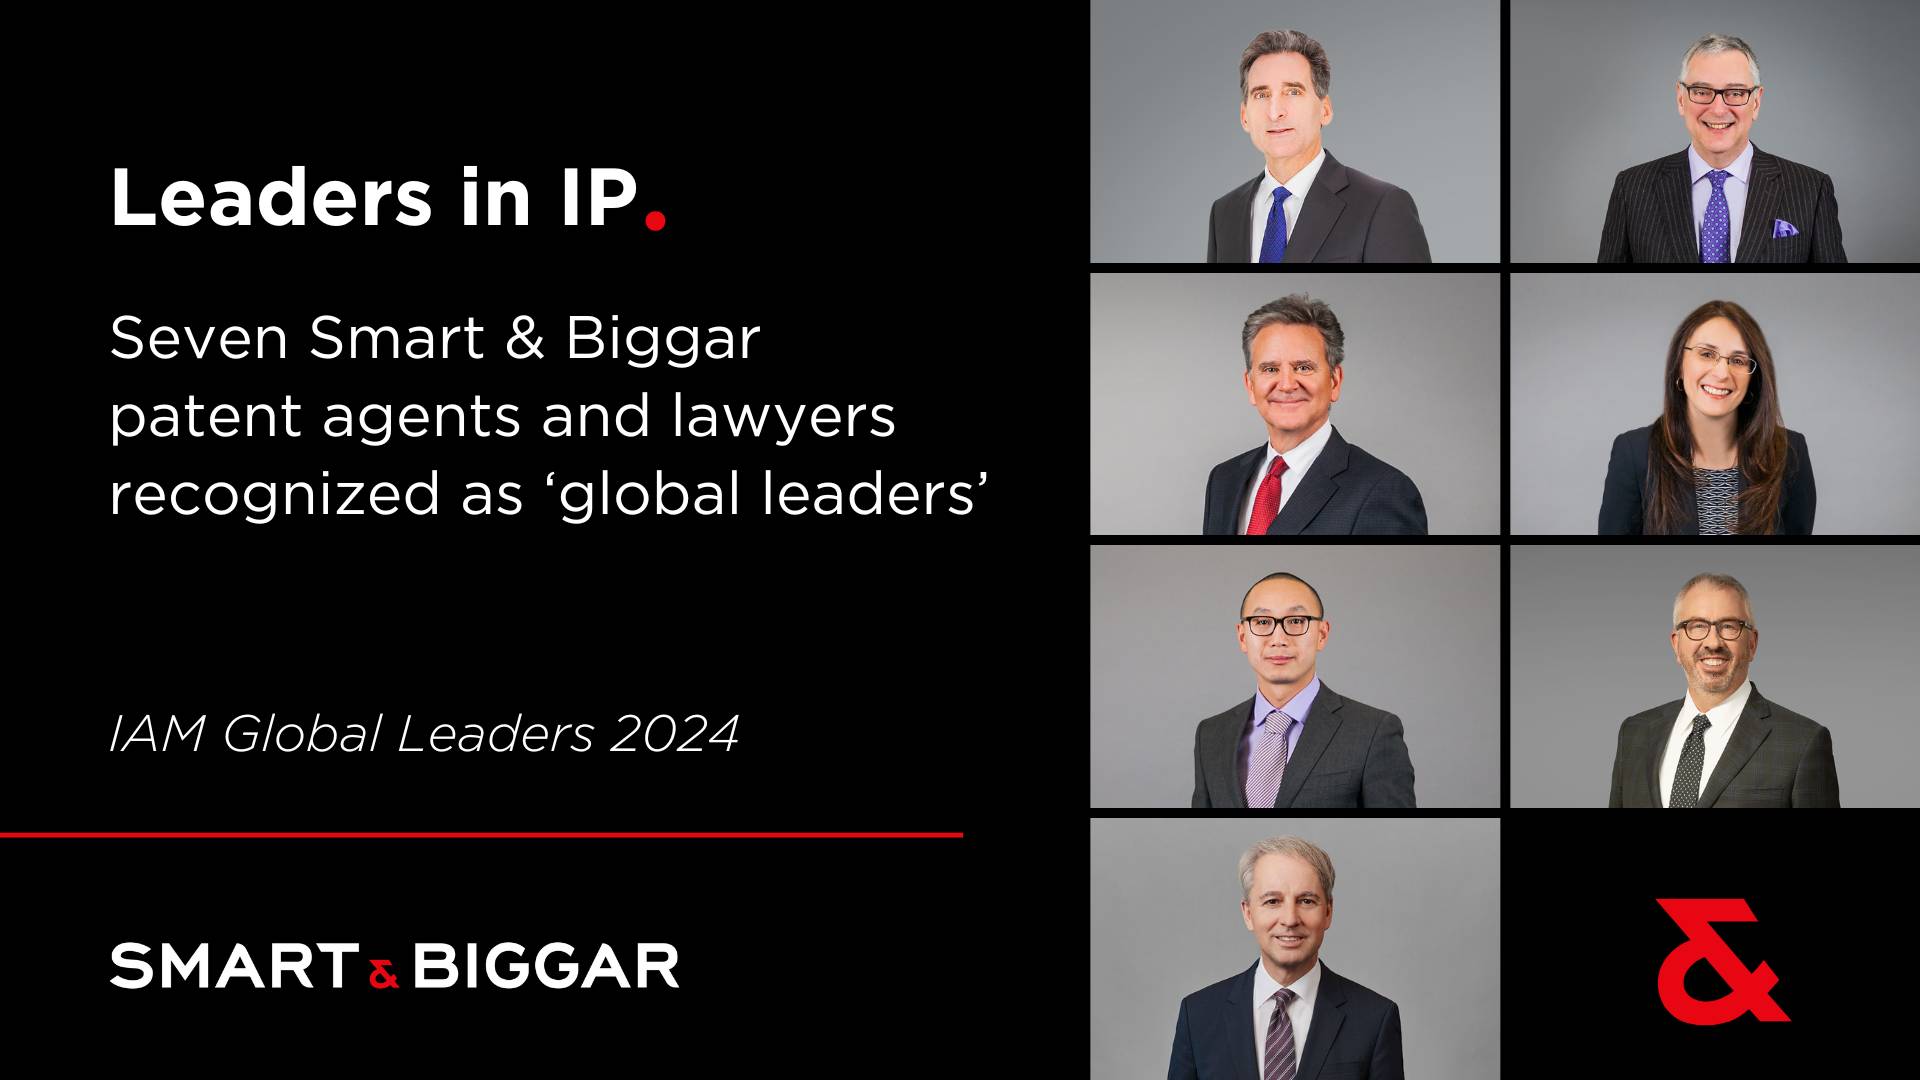 Smart & Biggar tops the list with seven patent agents and lawyers